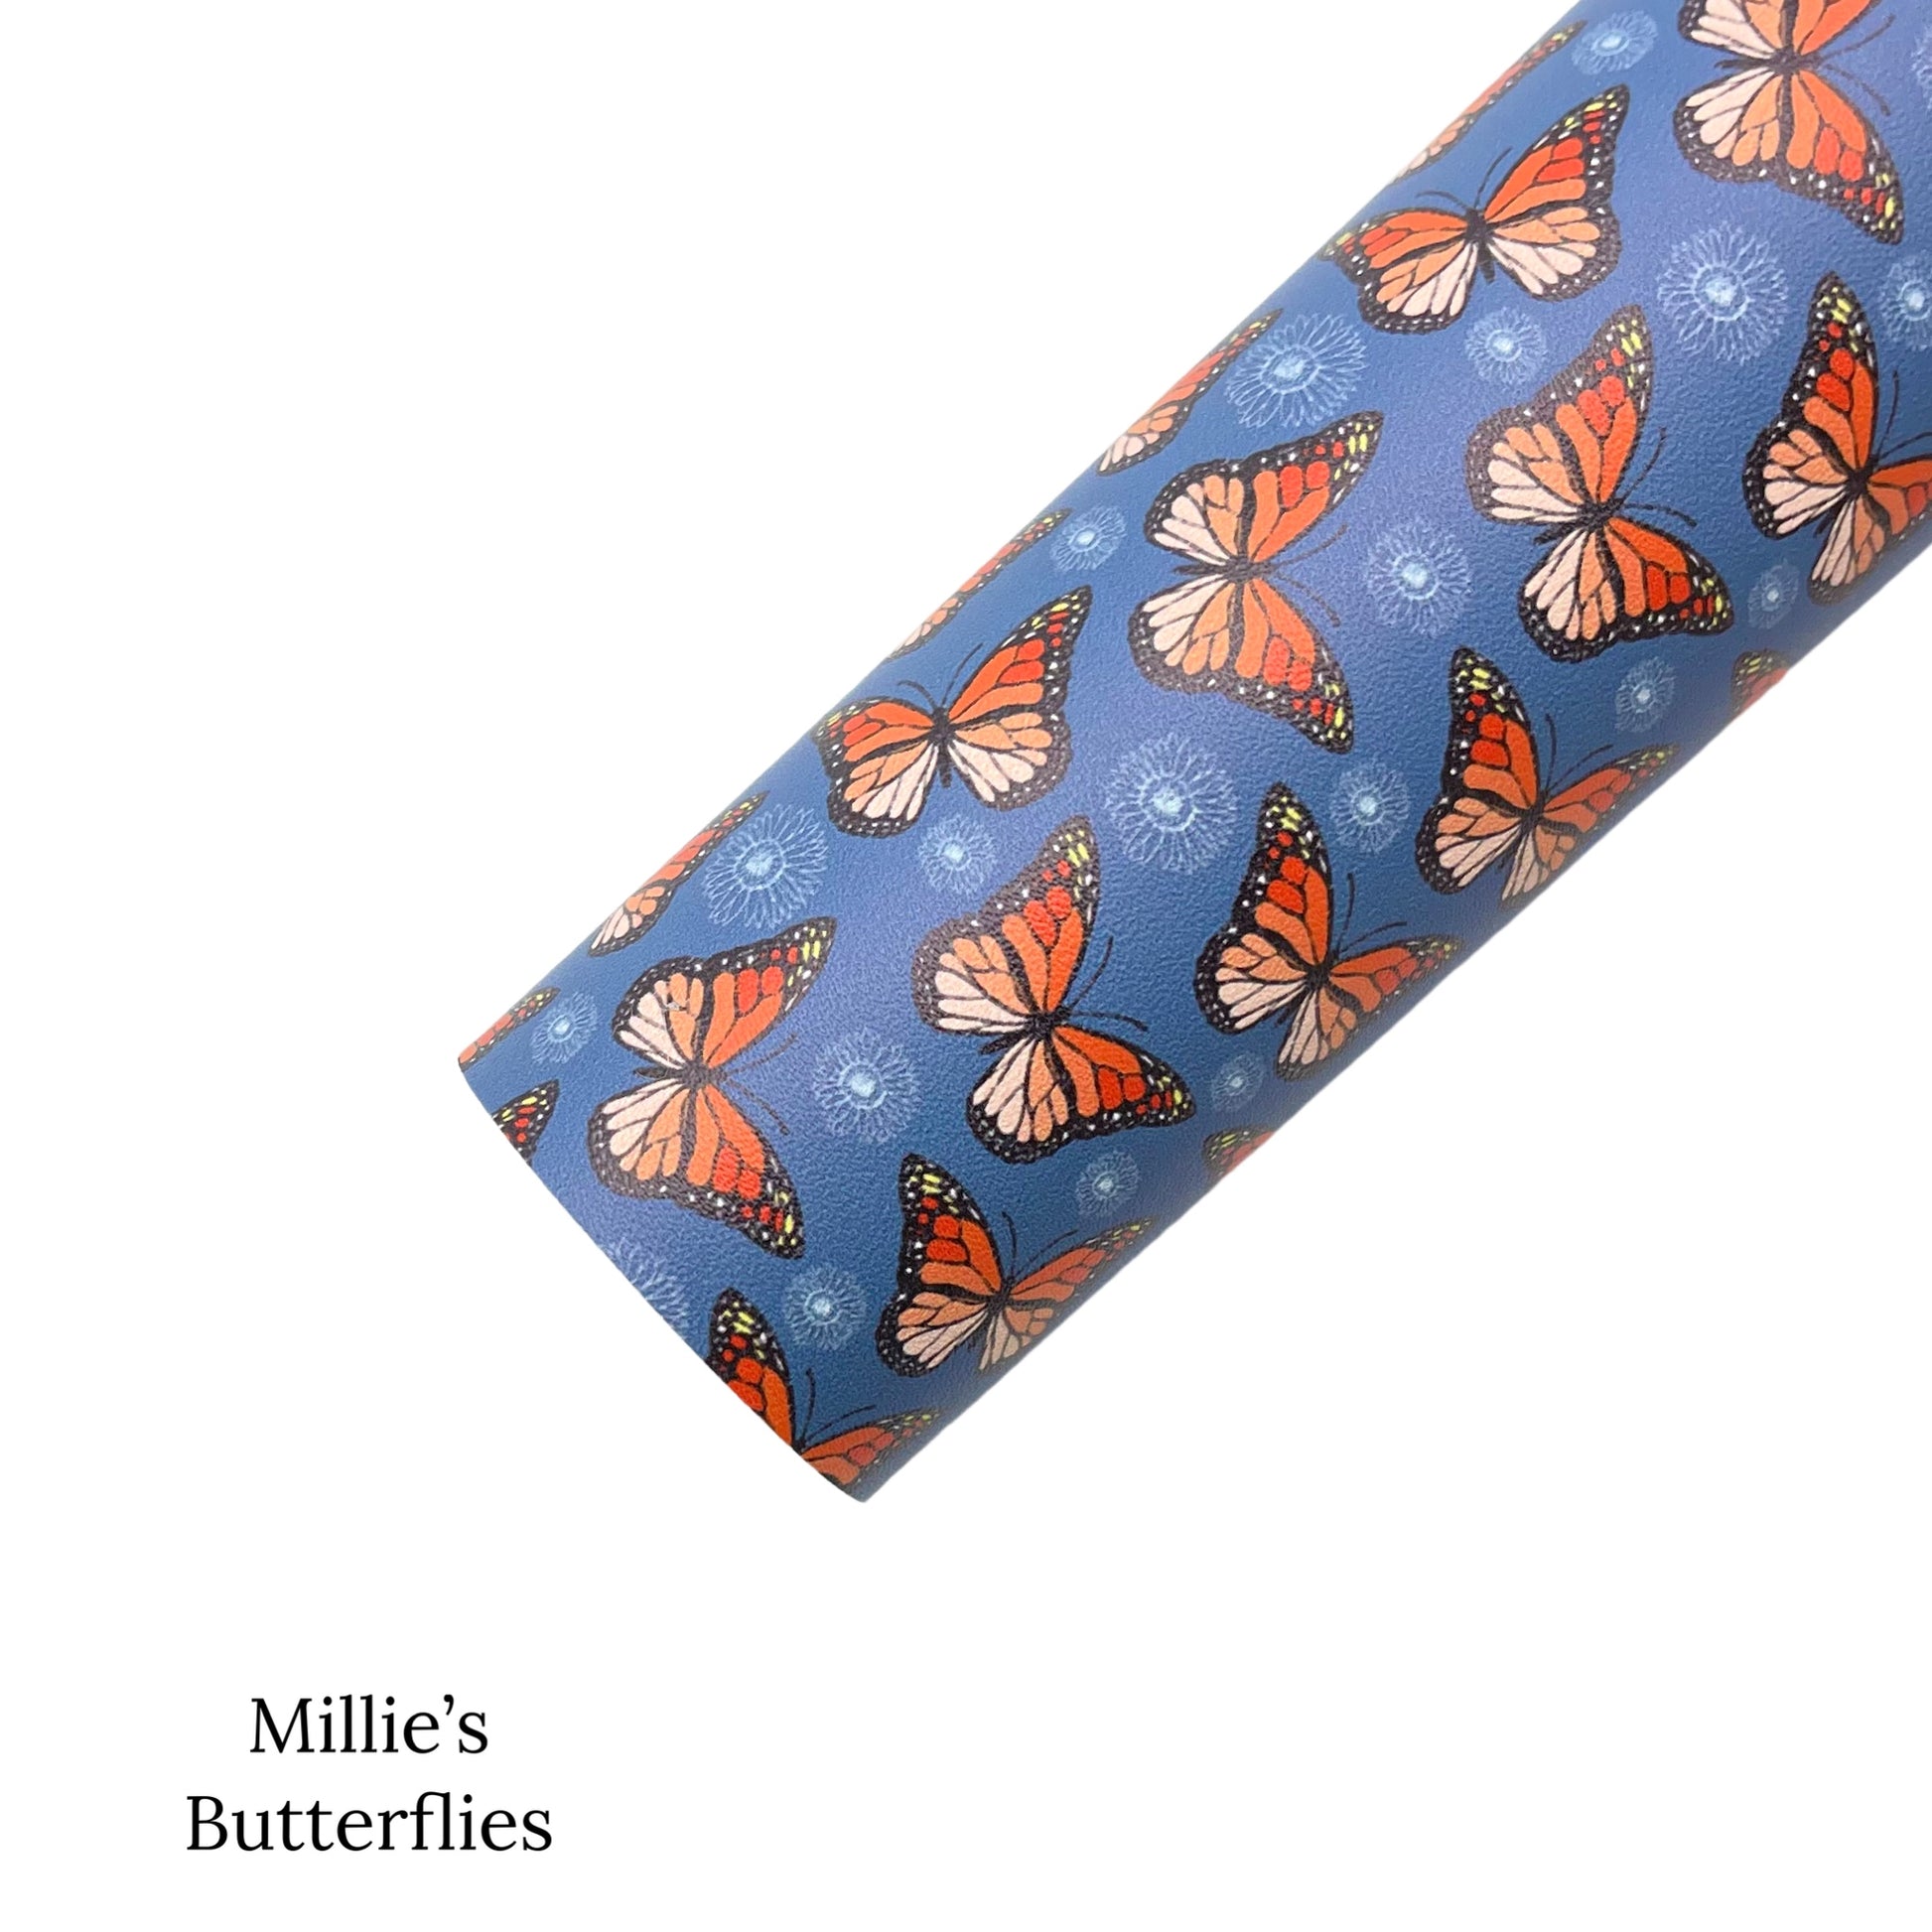 Rolled blue faux leather sheet with orange and black monarch butterflies and white flower pattern.